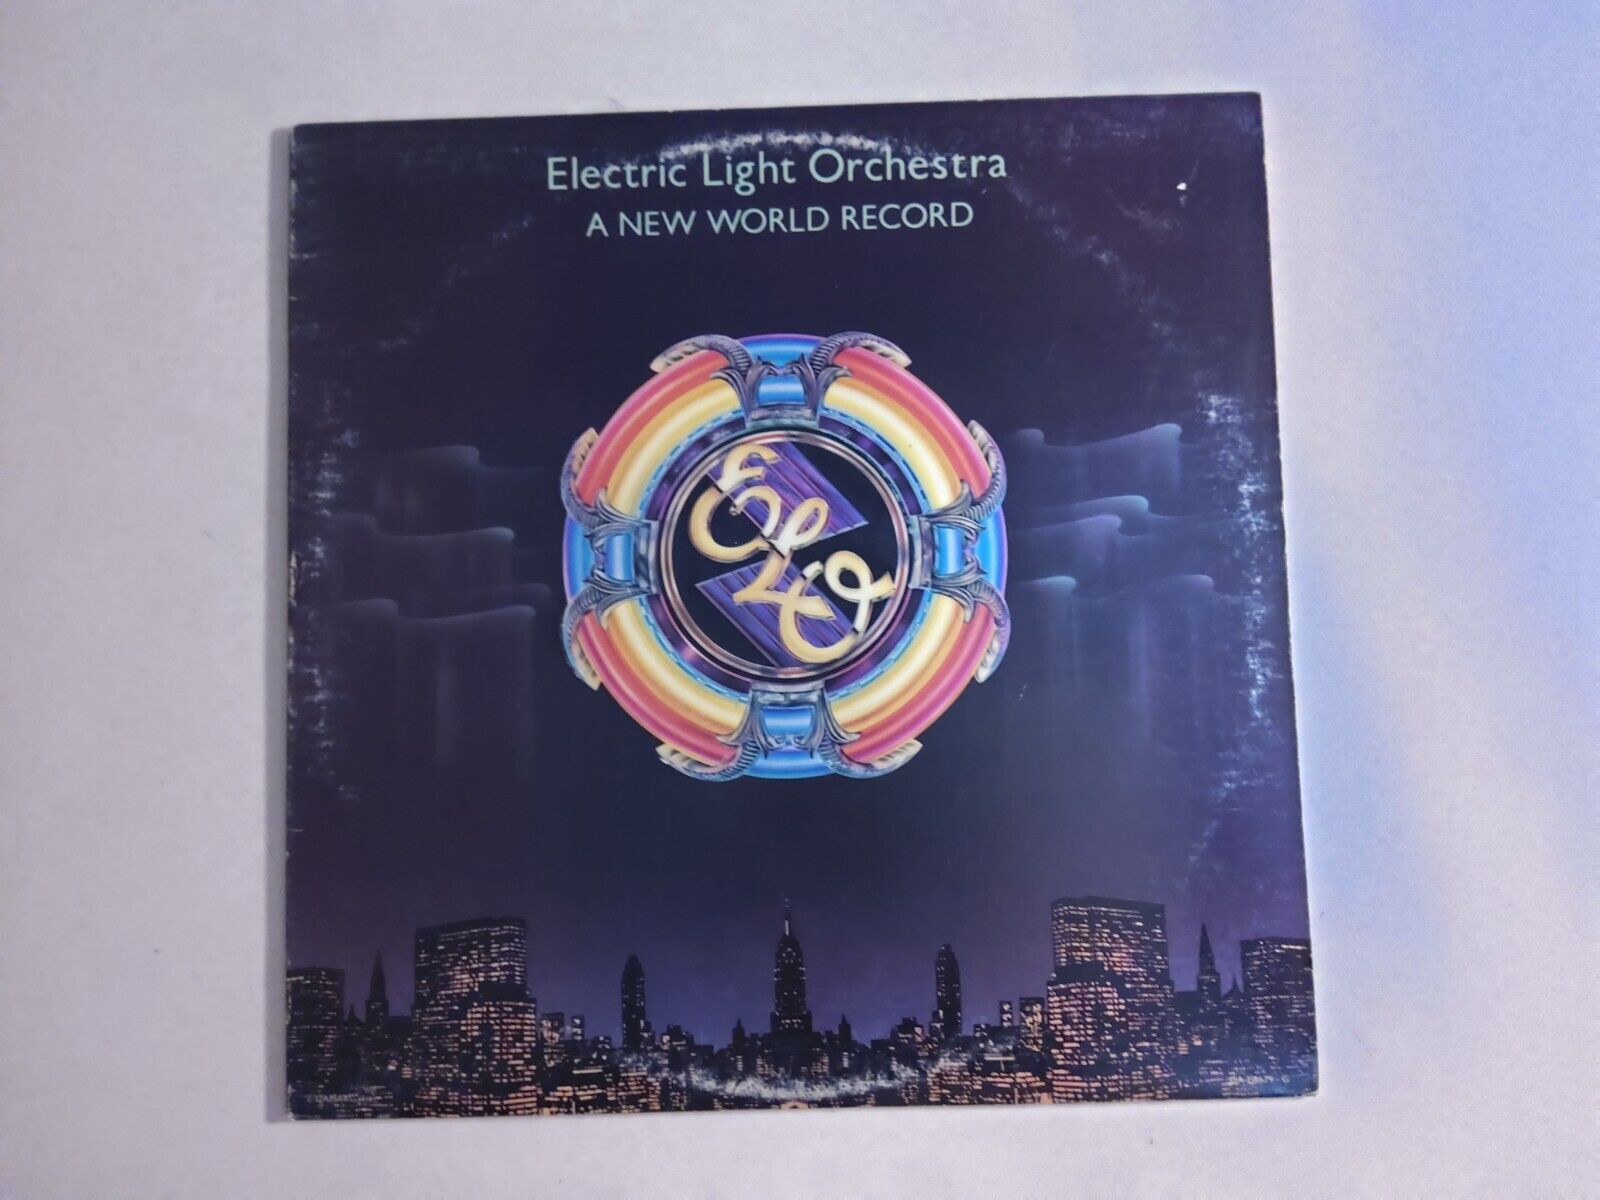 USED! Electric Light Orchestra ELO "A New World Record" LP Record 1976  UA-679G